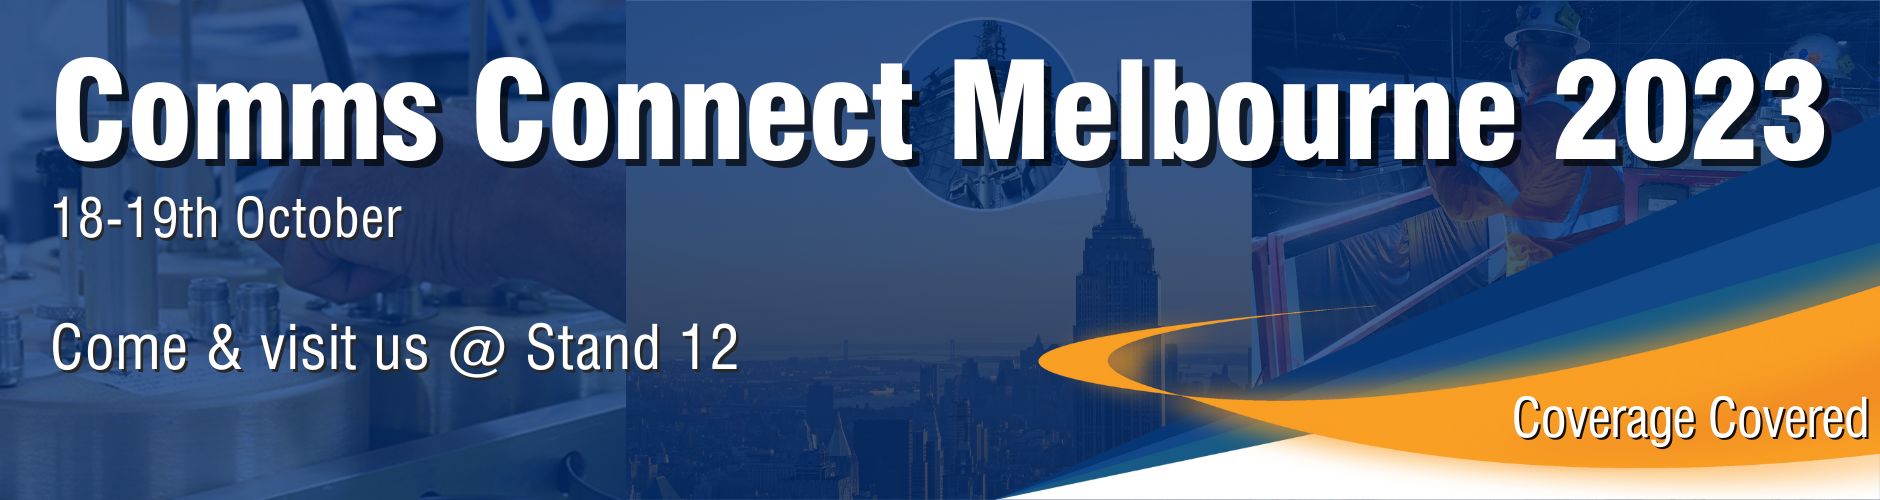 Join RFI at Comms Connect Melbourne 2023